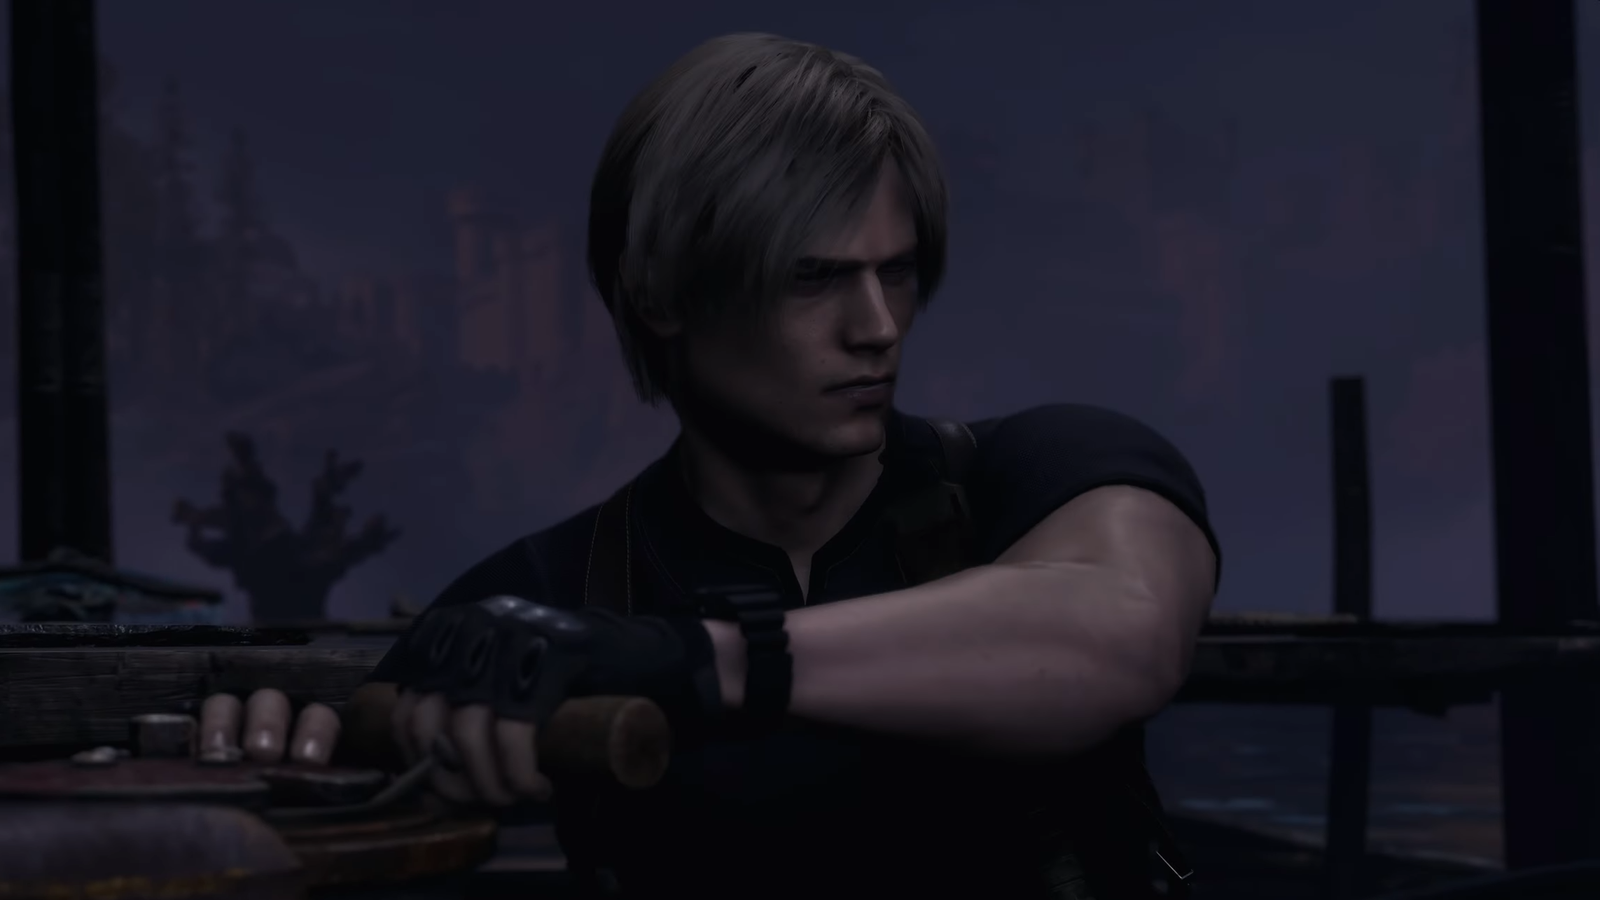 Why The Resident Evil 4 Remake Story May Be Full of Surprises